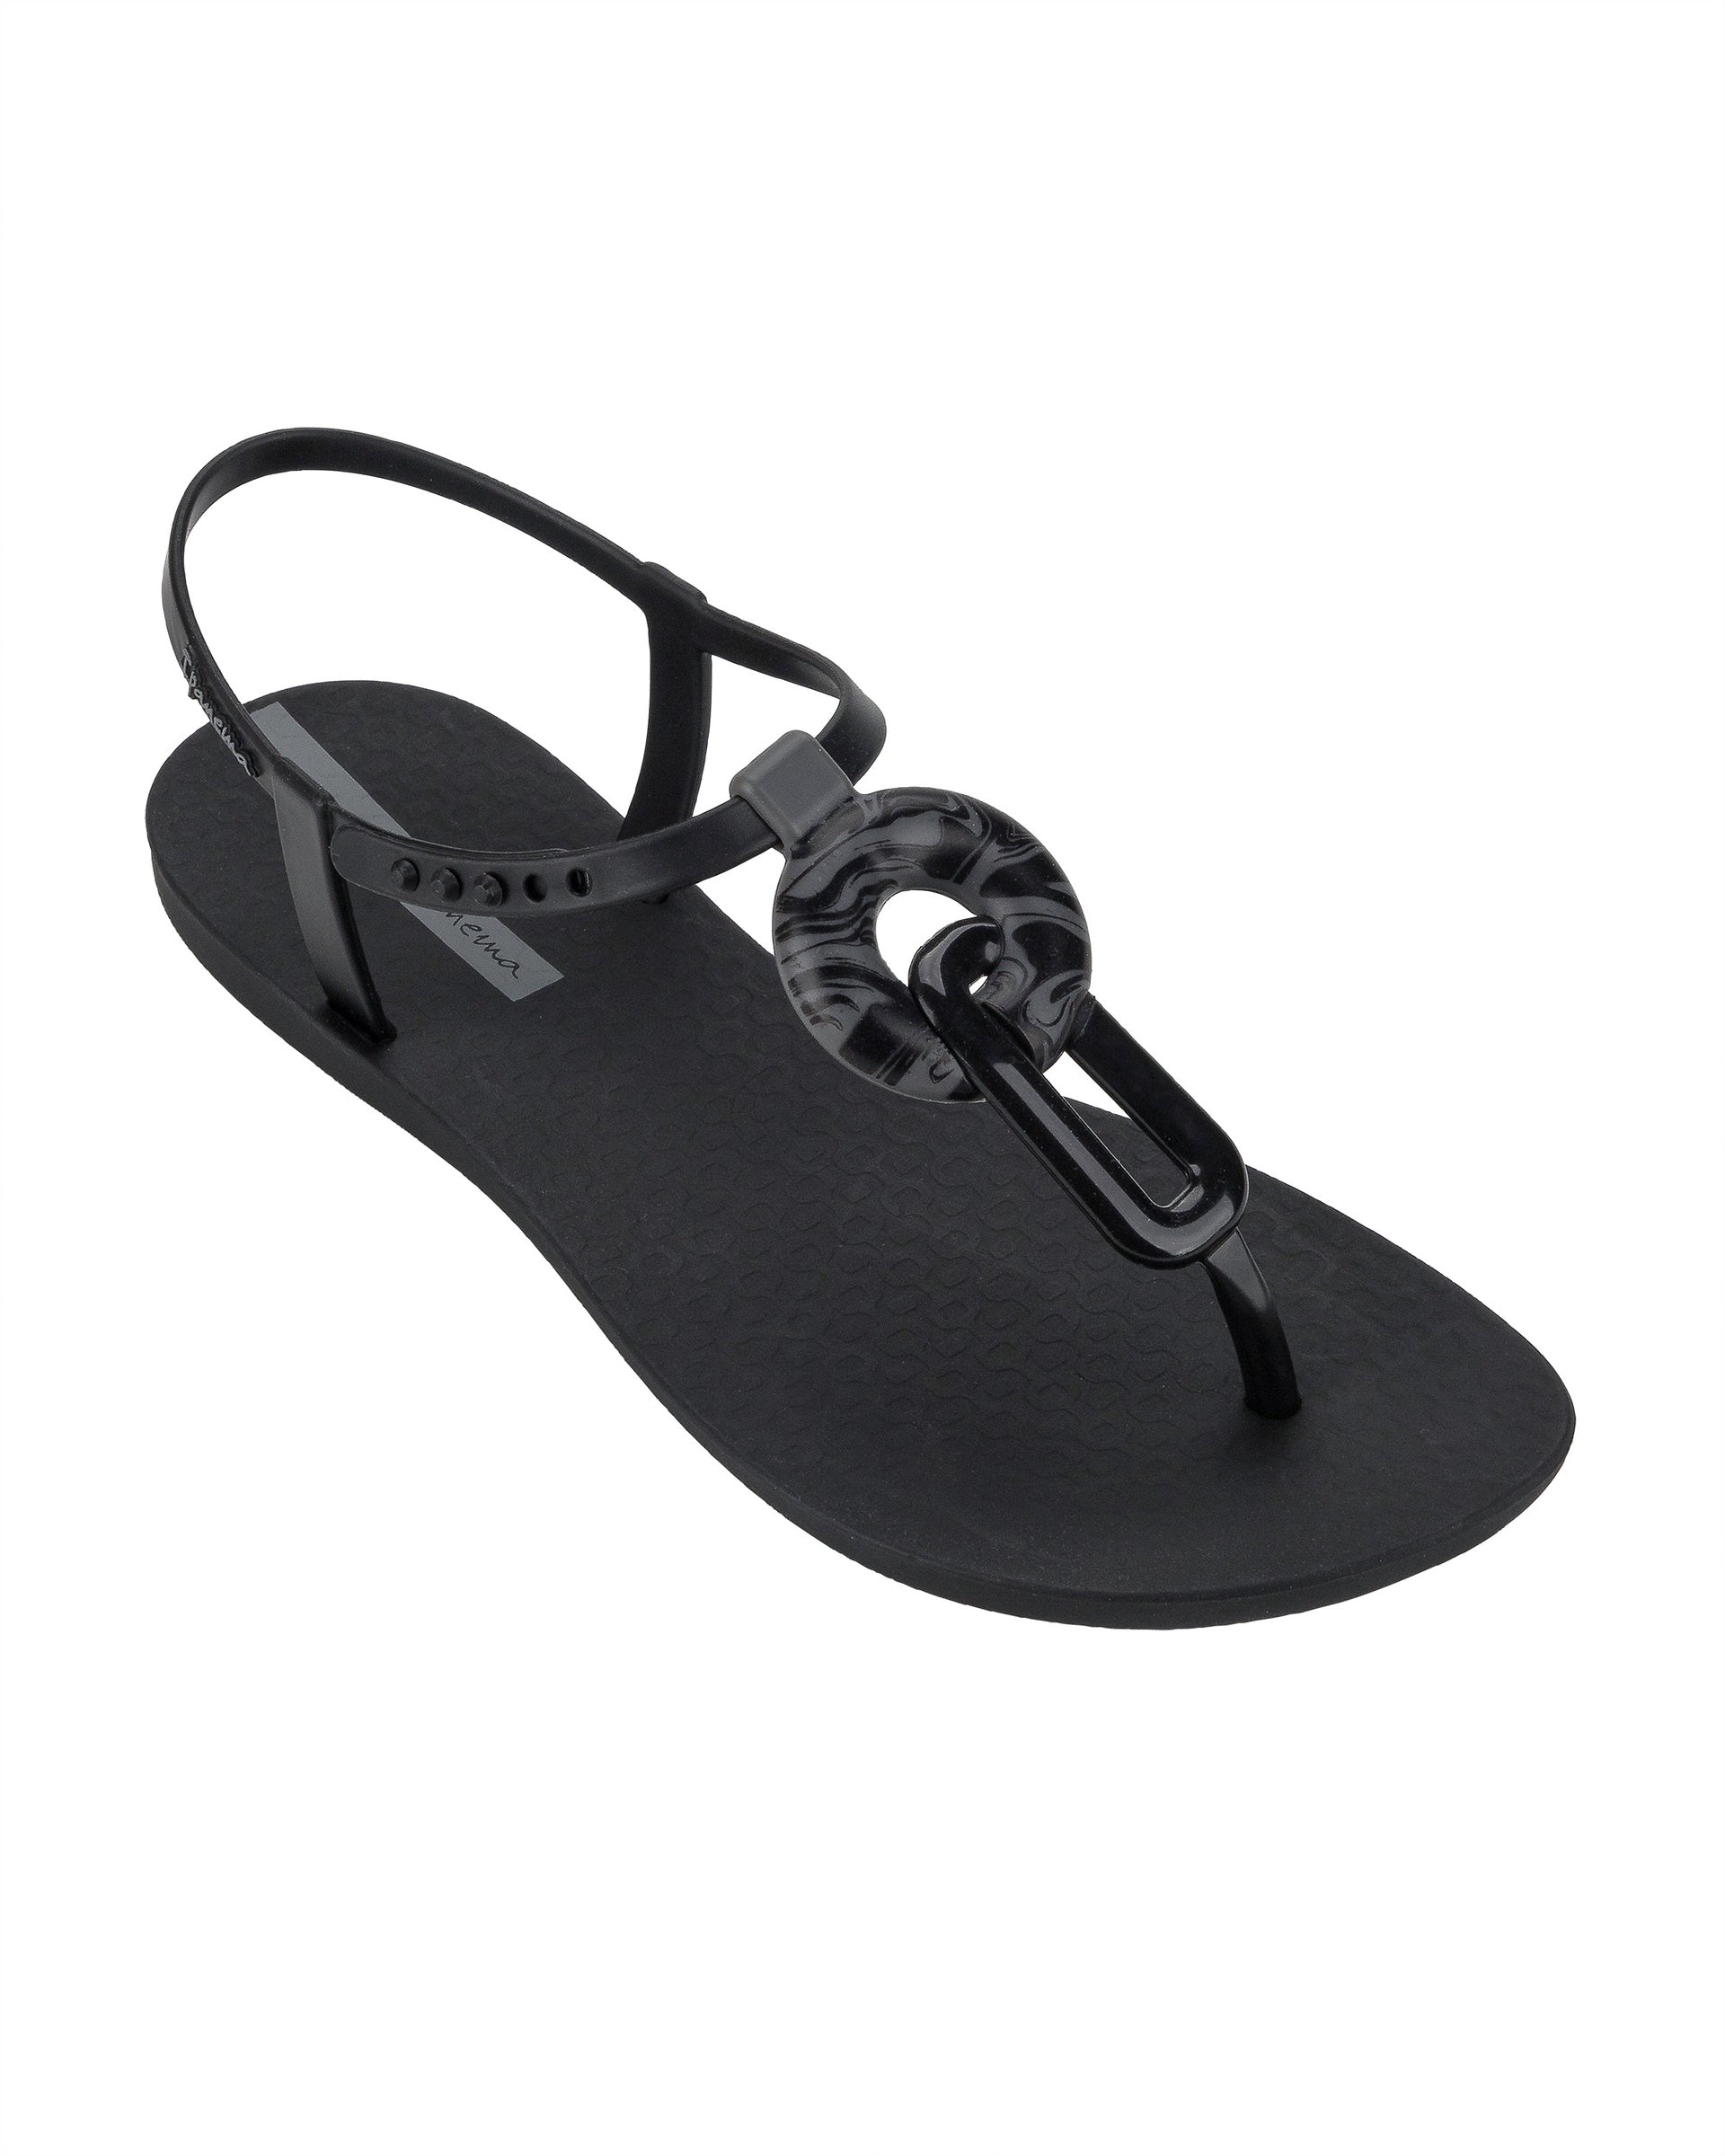 Angled view of a black Ipanema Class Marble women's t-strap sandal.